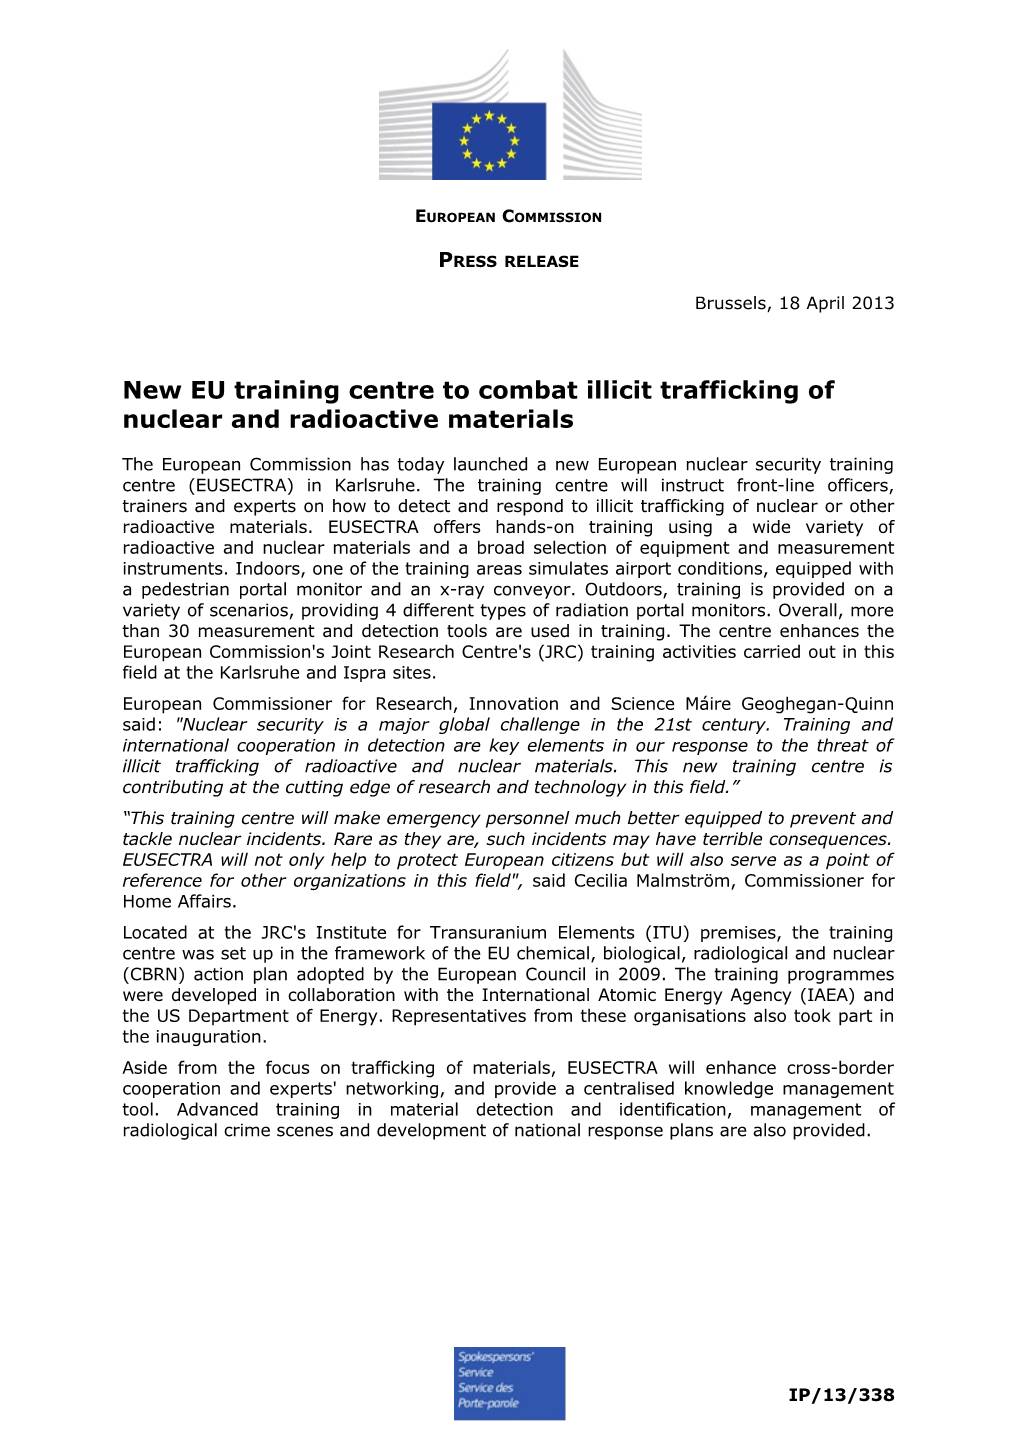 New EU Training Centre to Combat Illicit Trafficking of Nuclear and Radioactive Materials